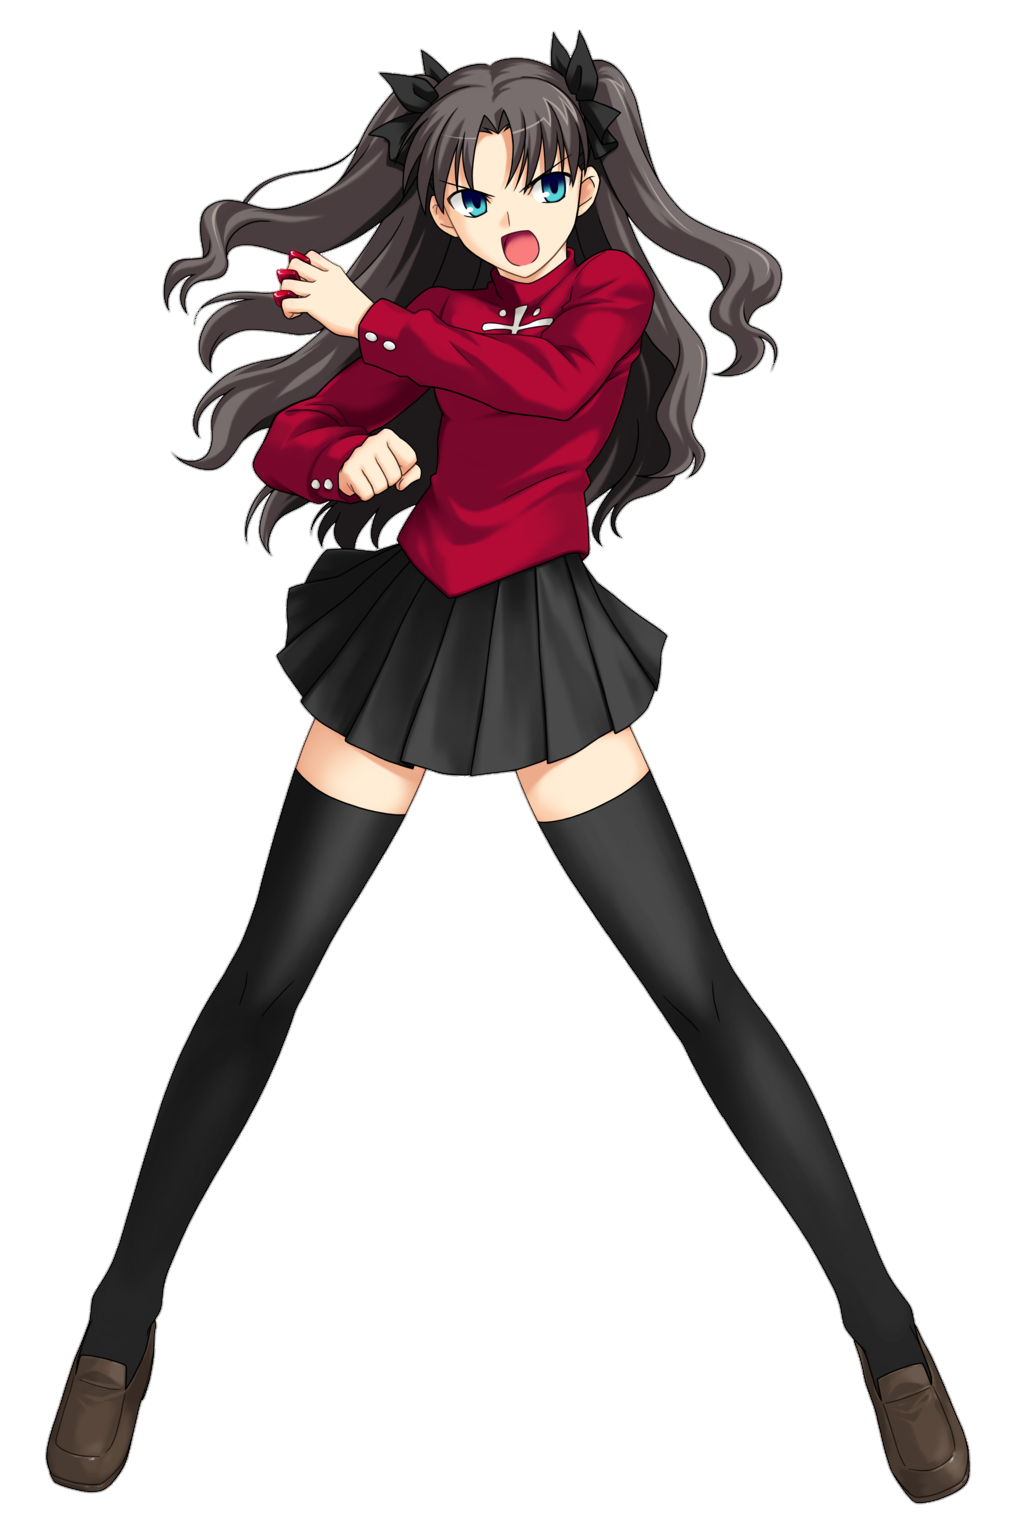 Fatevember: Fate Stay Night’s Rin Tohsaka: The Tsundere with the Iron